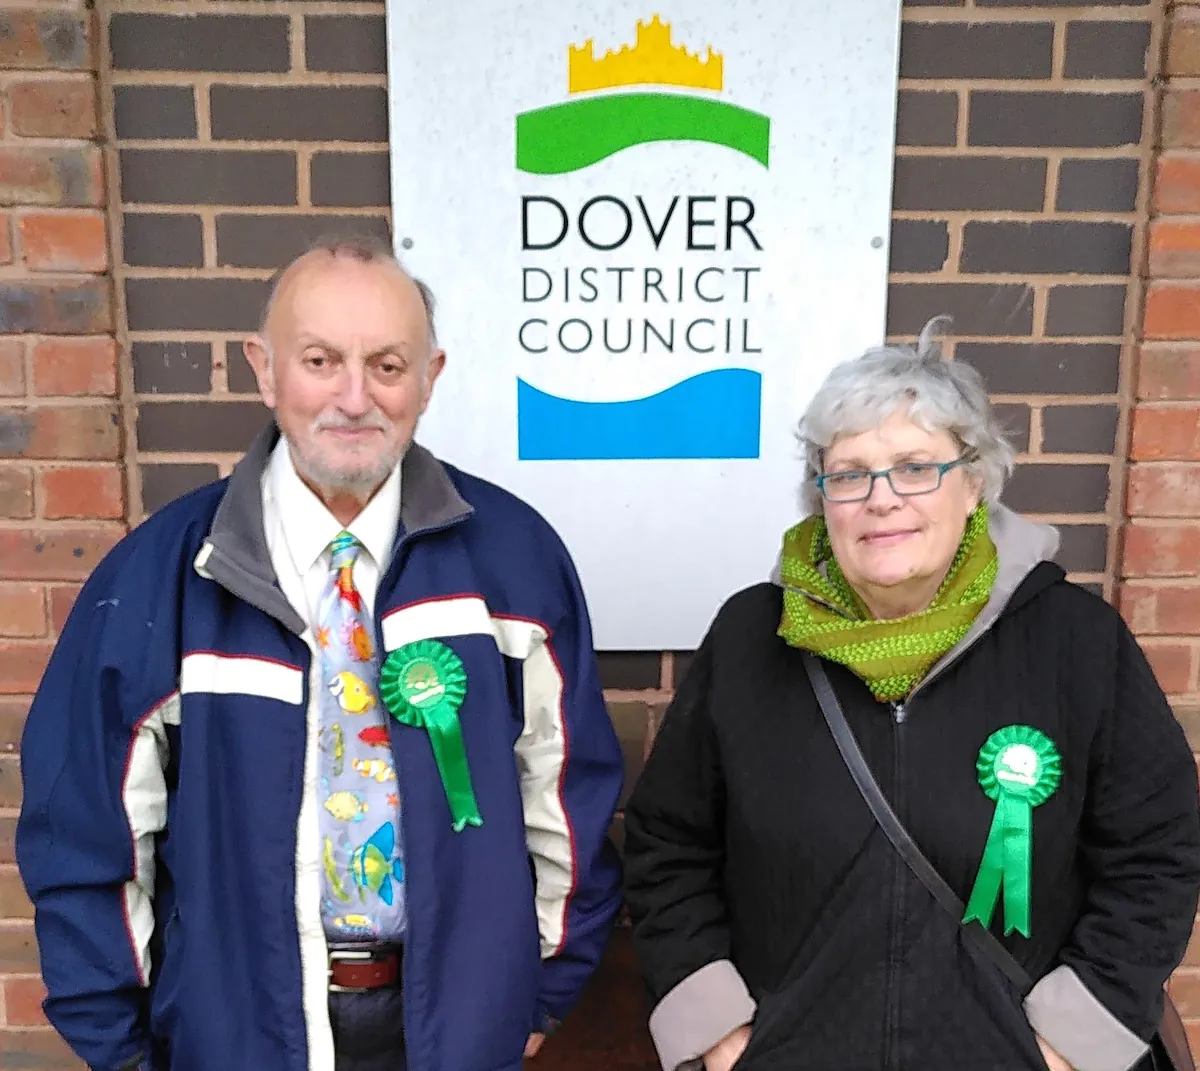 Candidates for Eastry Rural, Pete Findley and Sarah Gleave